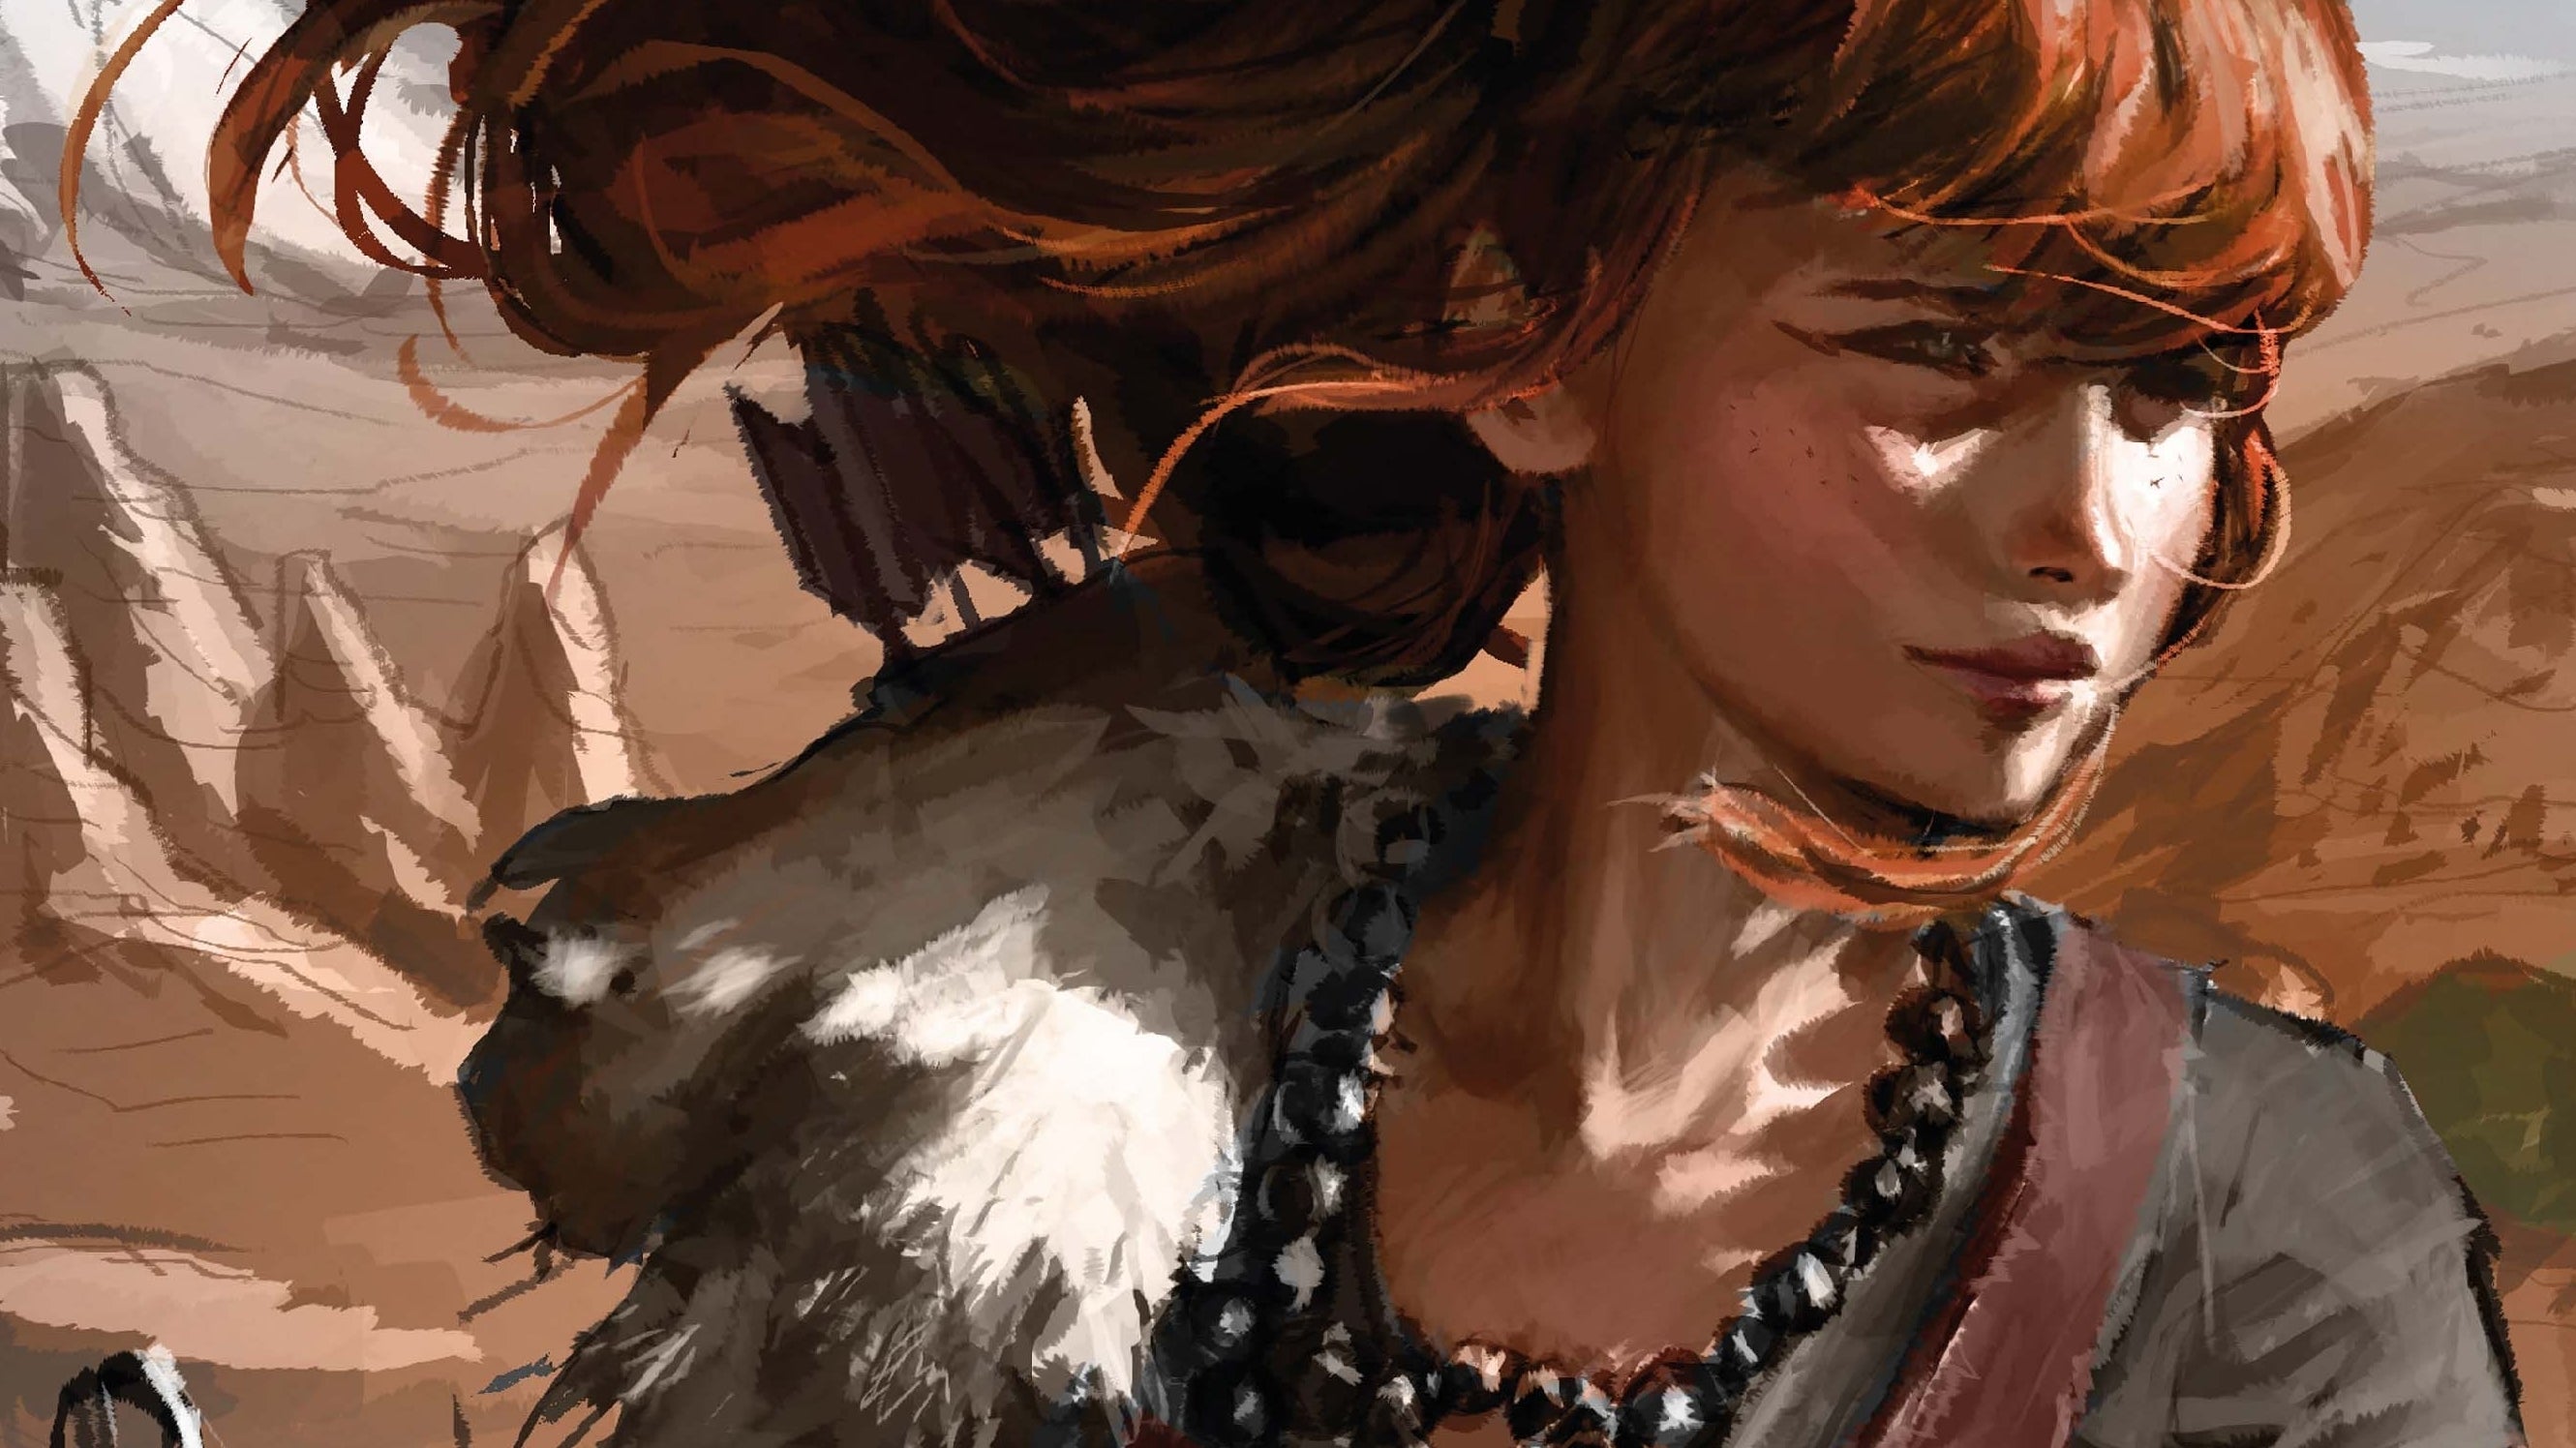 Image for Here's a first look at the new Horizon Zero Dawn graphic novel